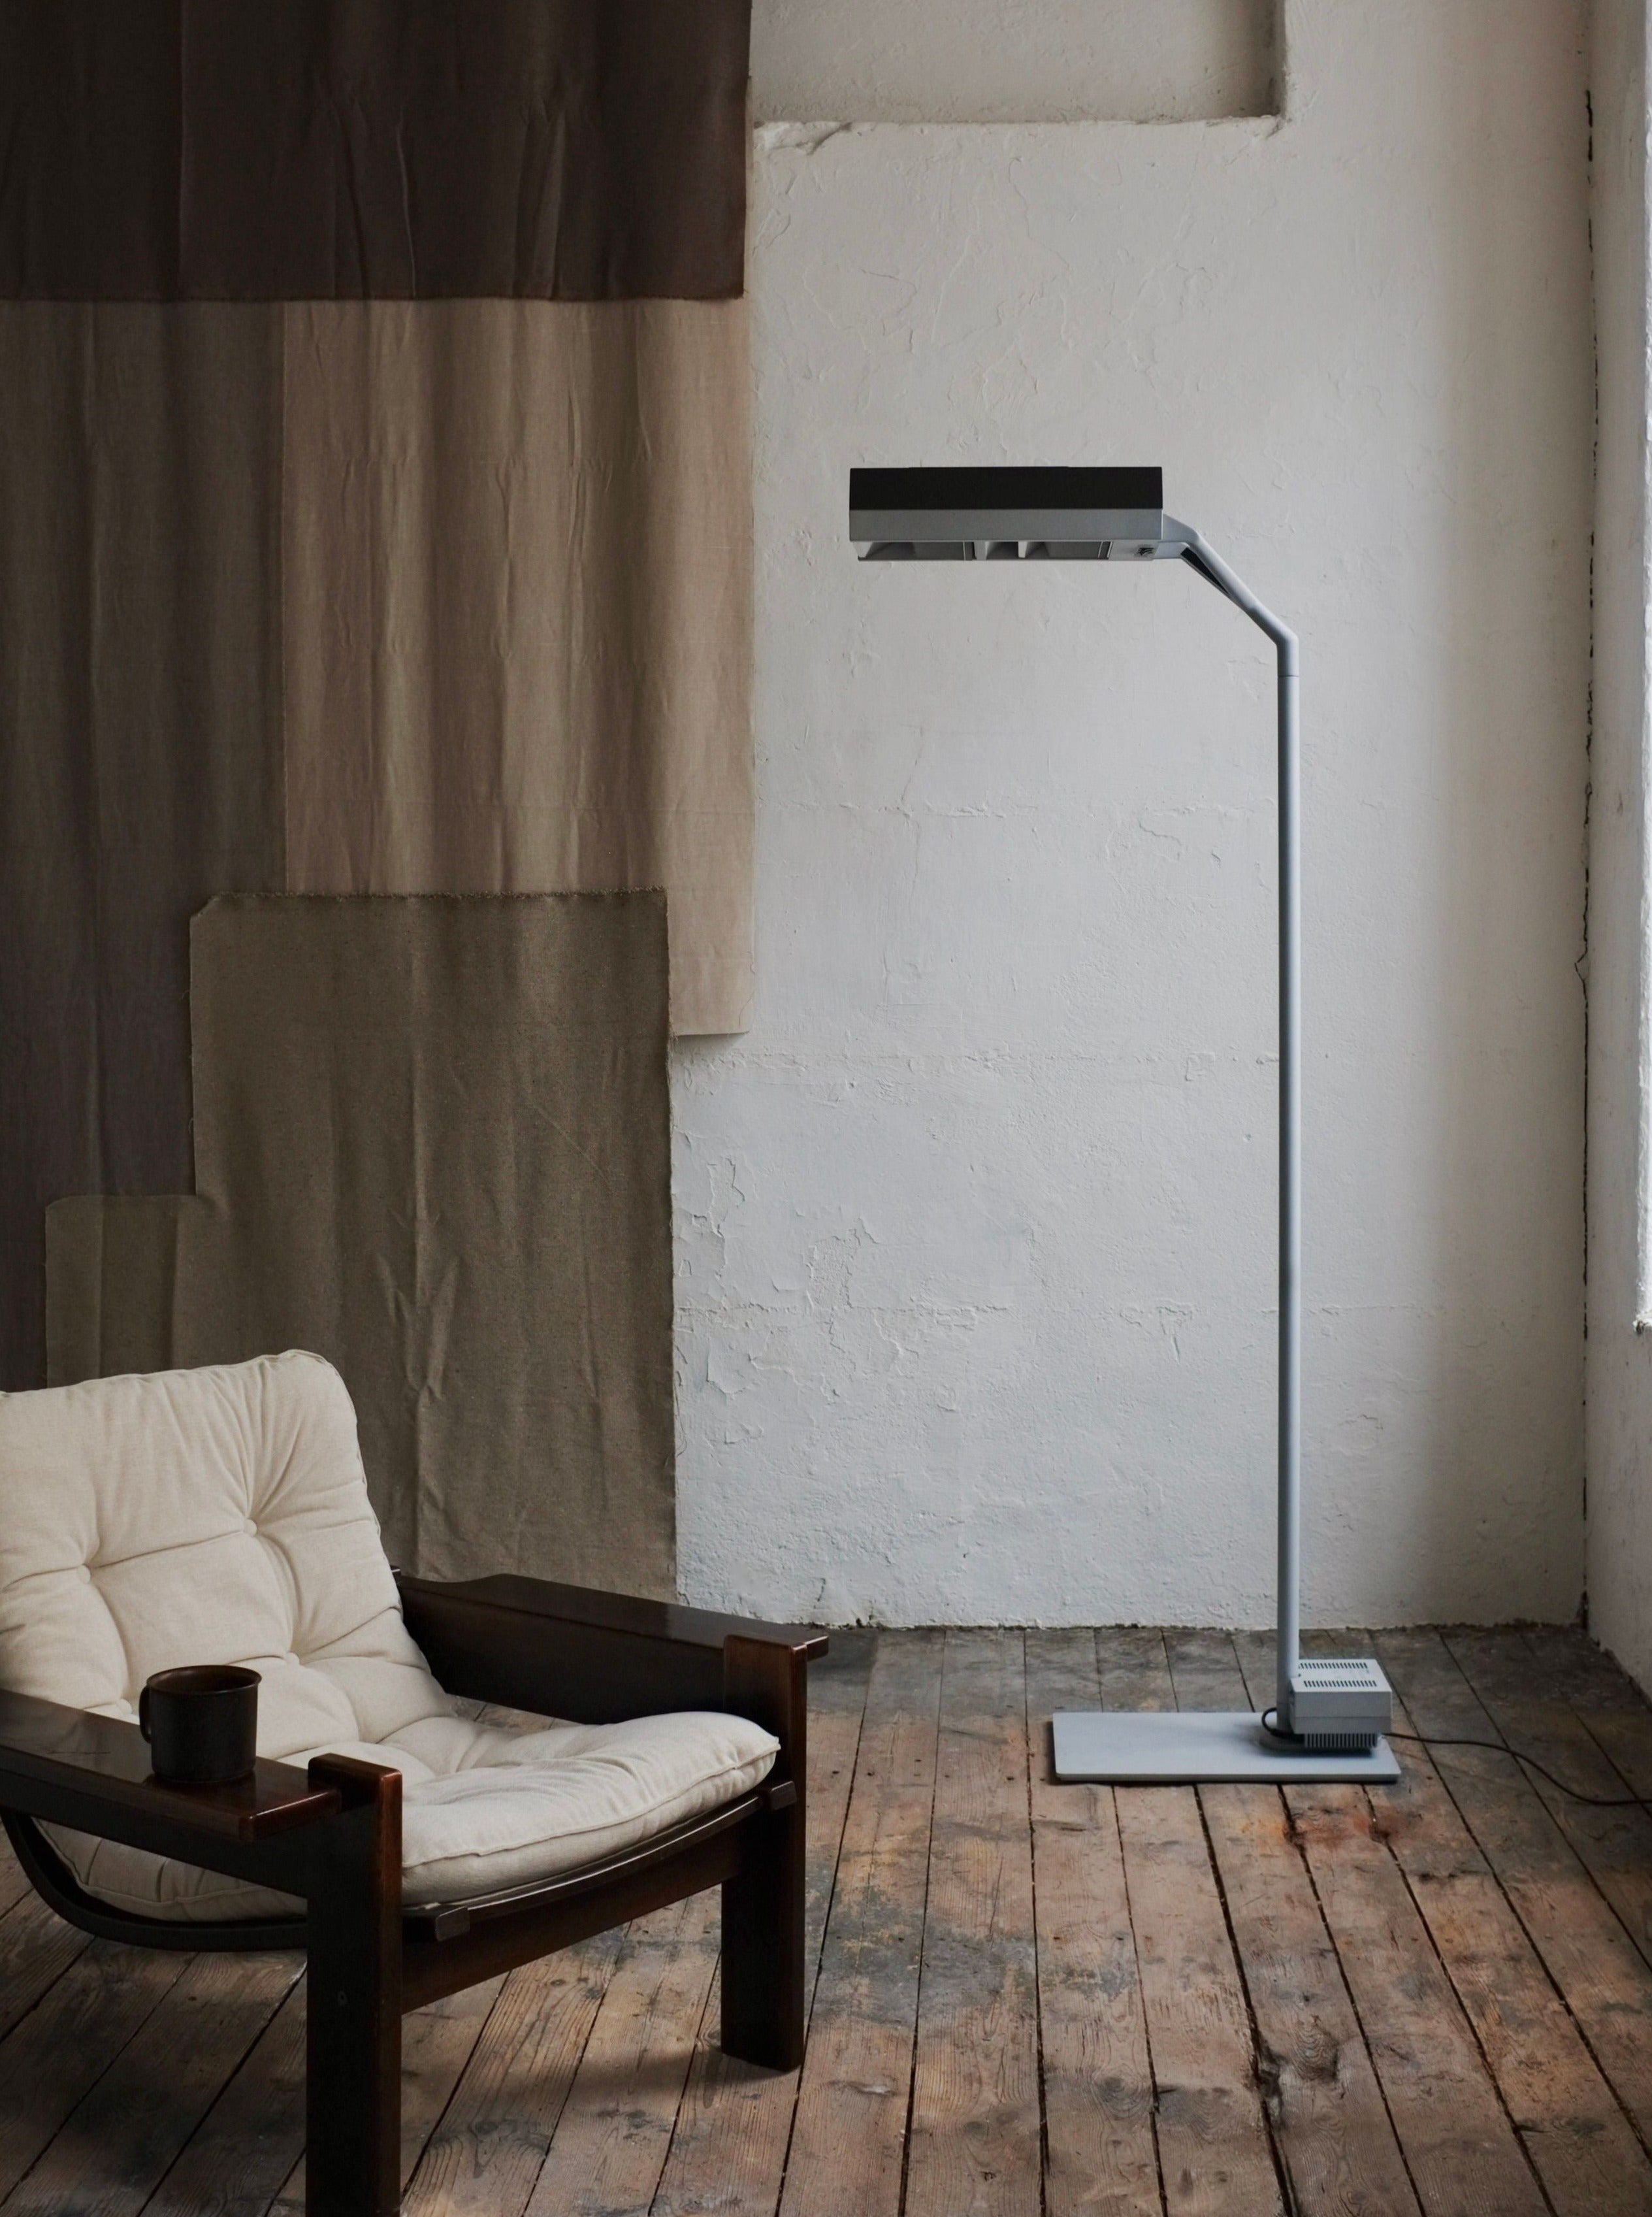 A minimalist corner with an armchair and a Postmodern Metal Lamp by Glen Oliver Löw and Antonio Citterio for Ansorg | 1990s beside it, set against a rustic white brick wall with a large draped fabric piece. A wooden floor and a small cup on the armrest add cozy details.